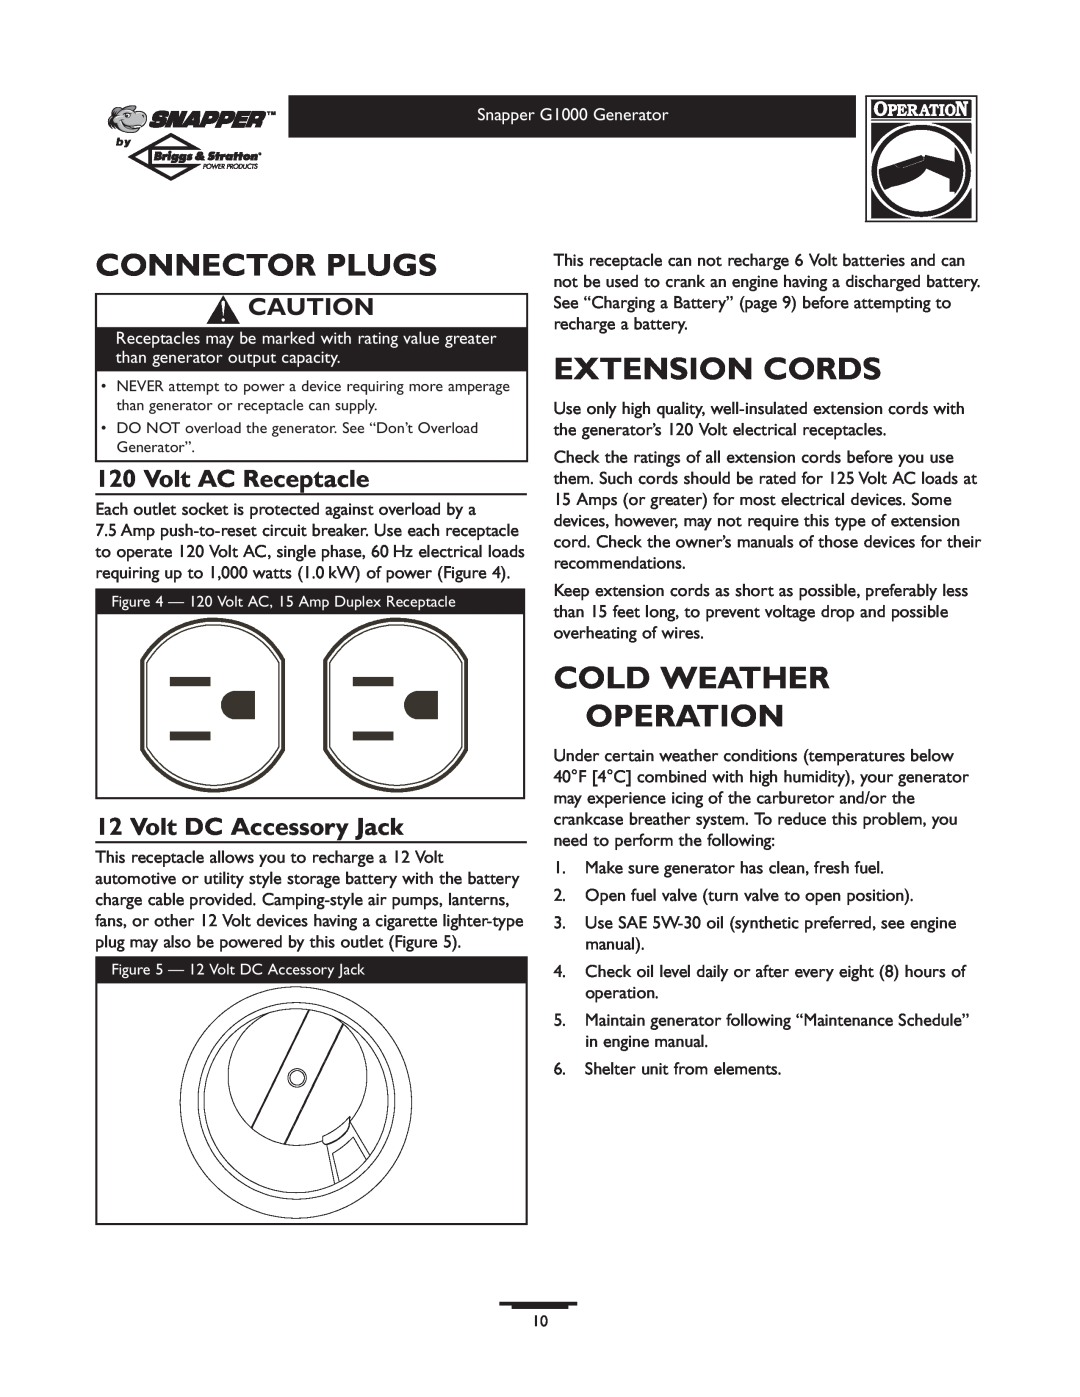 Snapper G1000 Connector Plugs, Extension Cords, Cold Weather Operation, Volt AC Receptacle, Volt DC Accessory Jack 